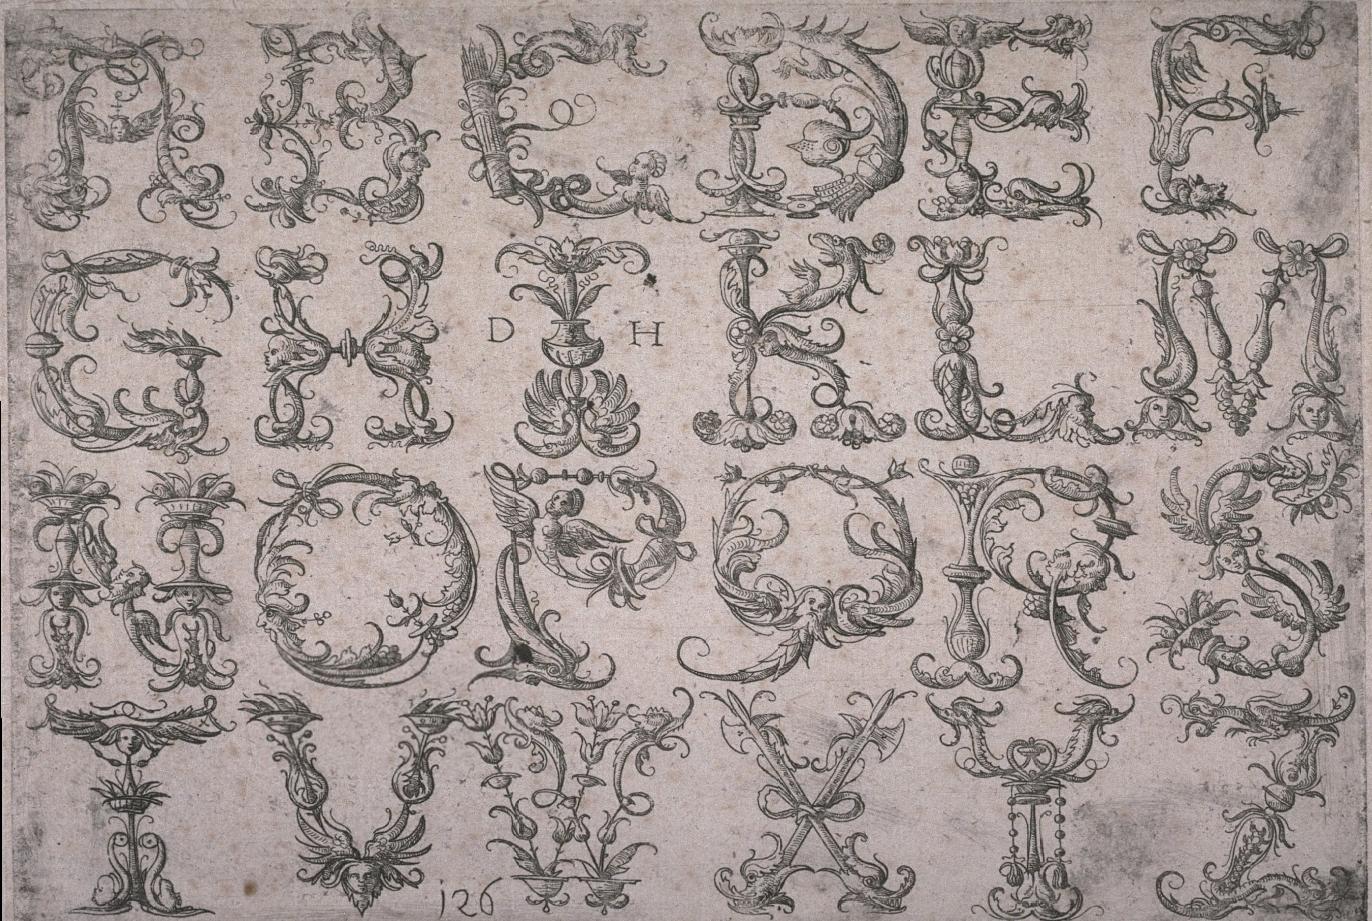 Alphabet of roman capital letters with metaphorical ornaments